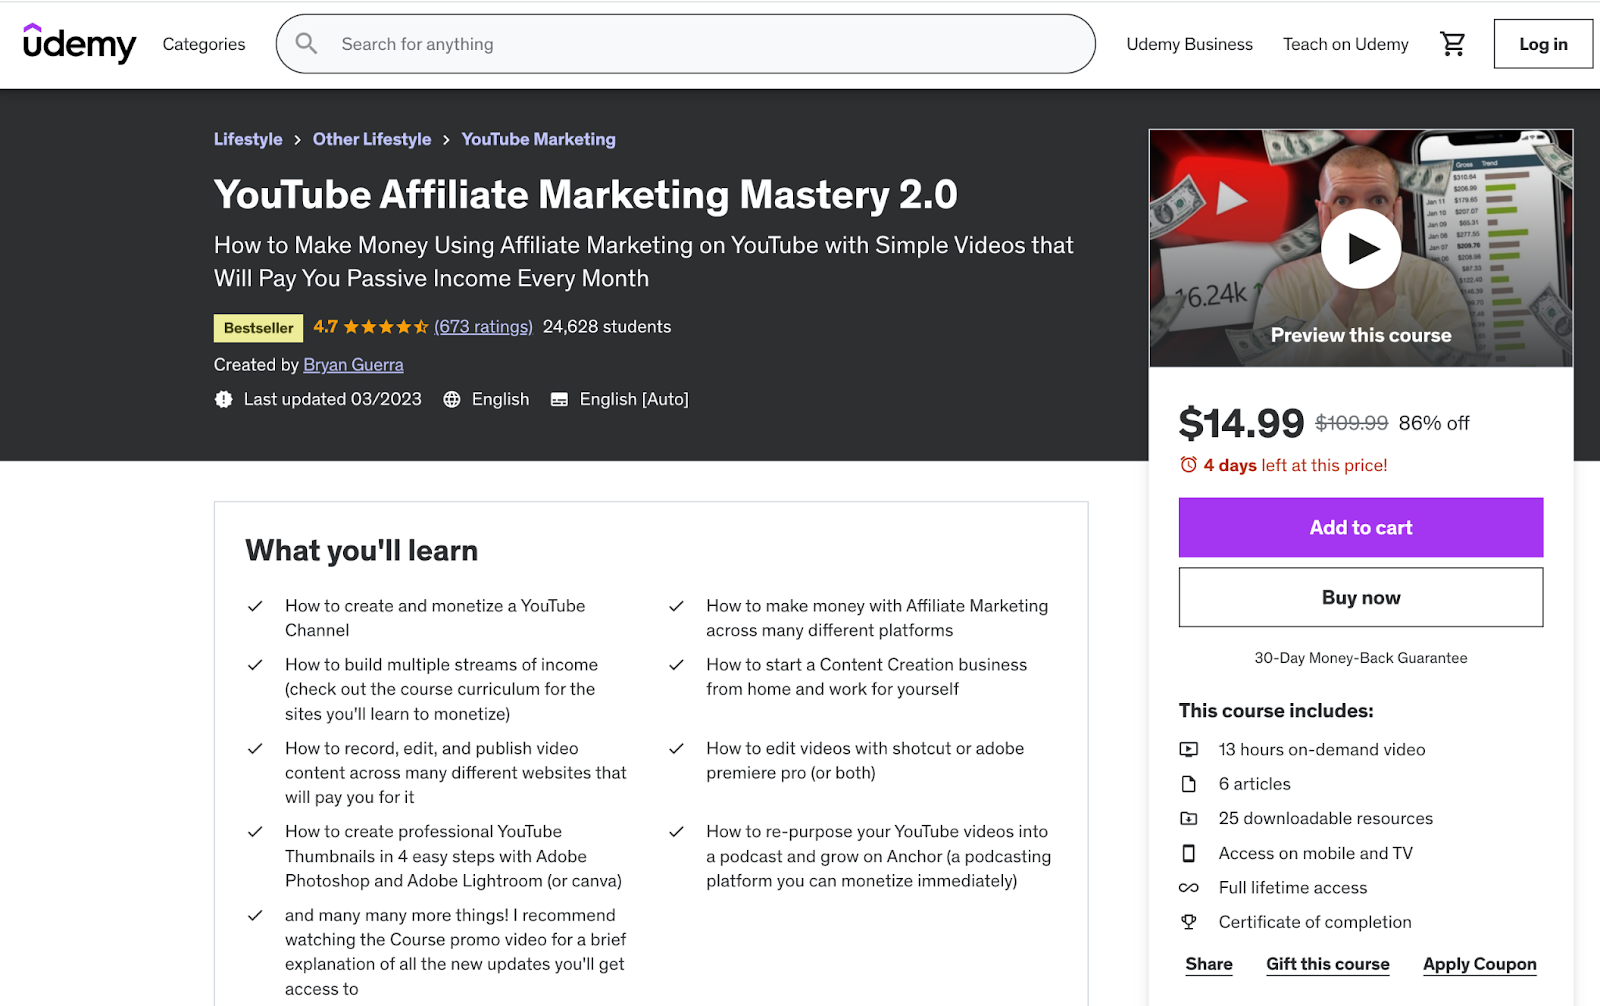 YouTube Affiliate Marketing Mastery 2.0 course page on Udemy